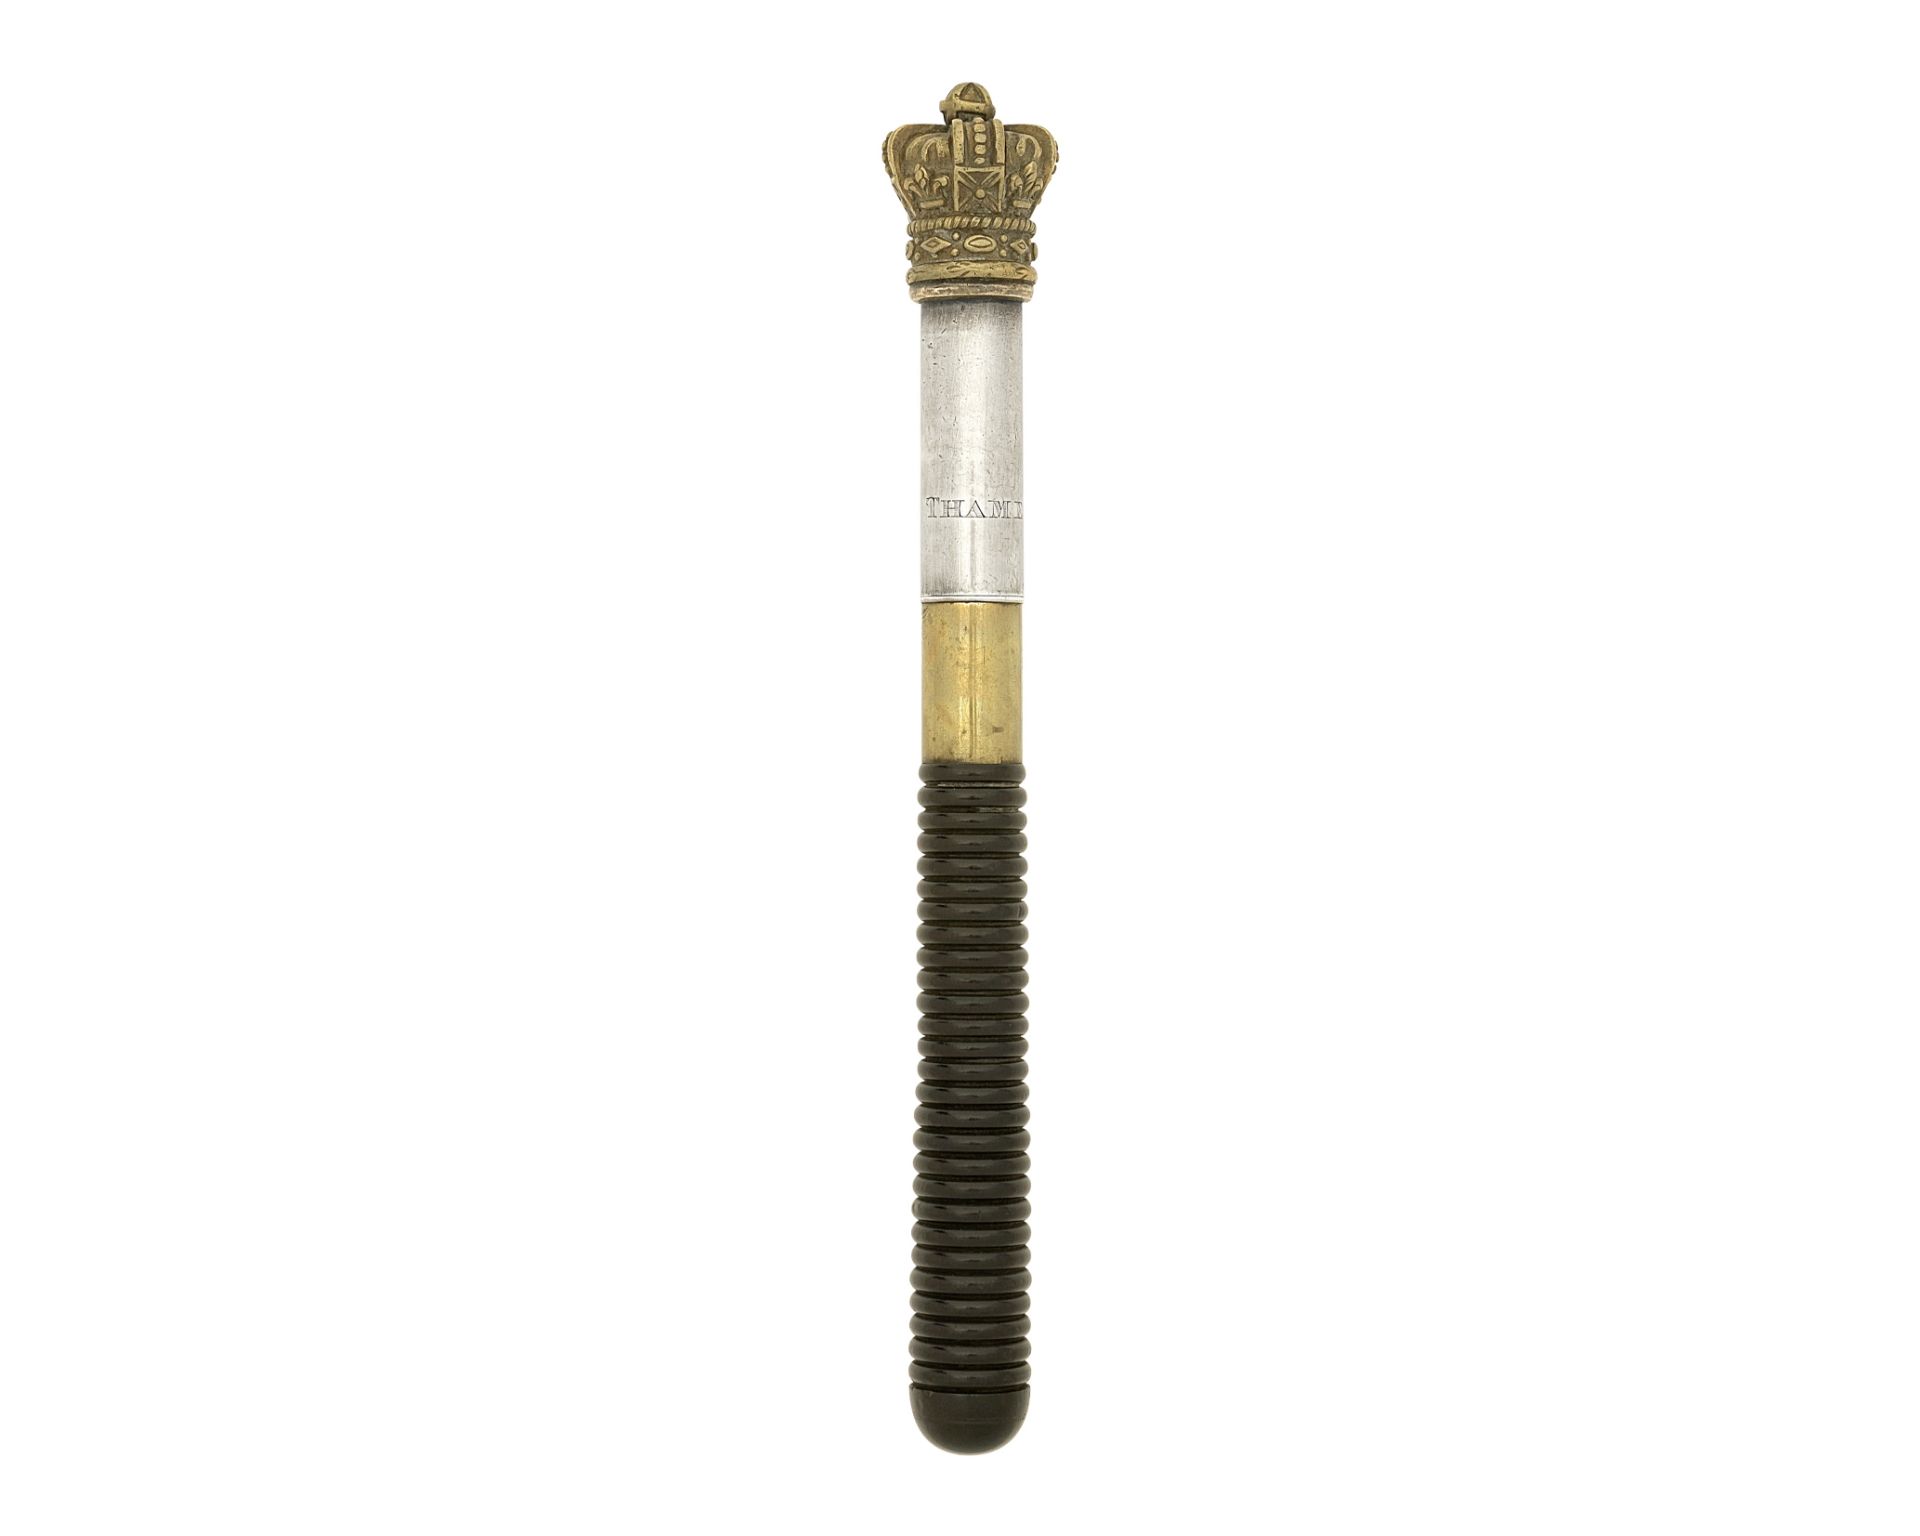 A Victorian Brass Thames Police Tipstave